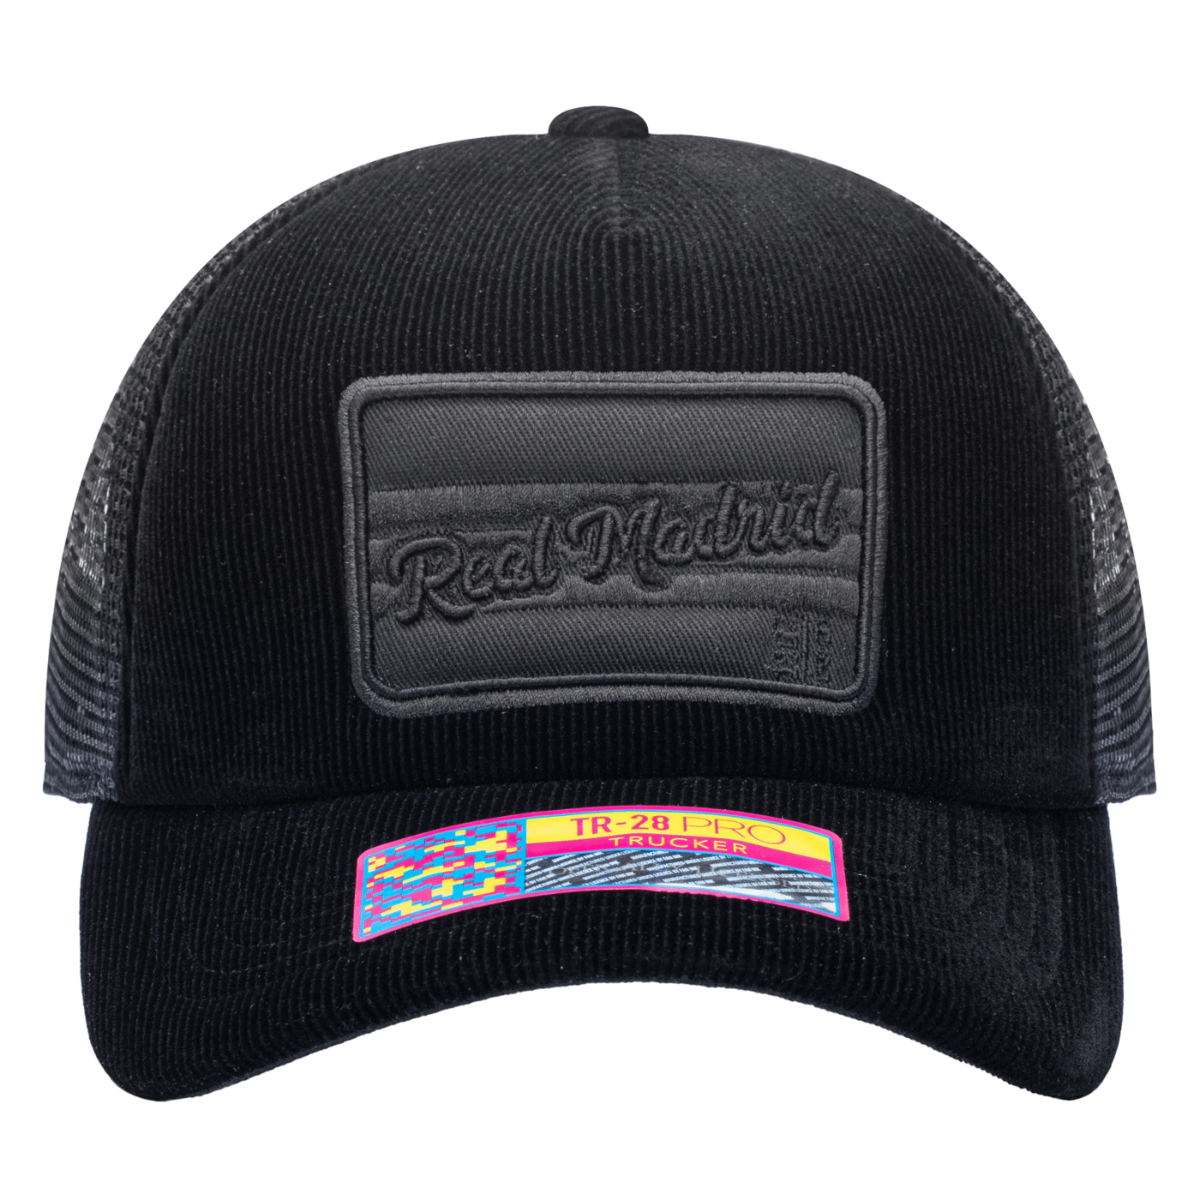 FI Collection Real Madrid Signature Trucker Hat - Black (Front)